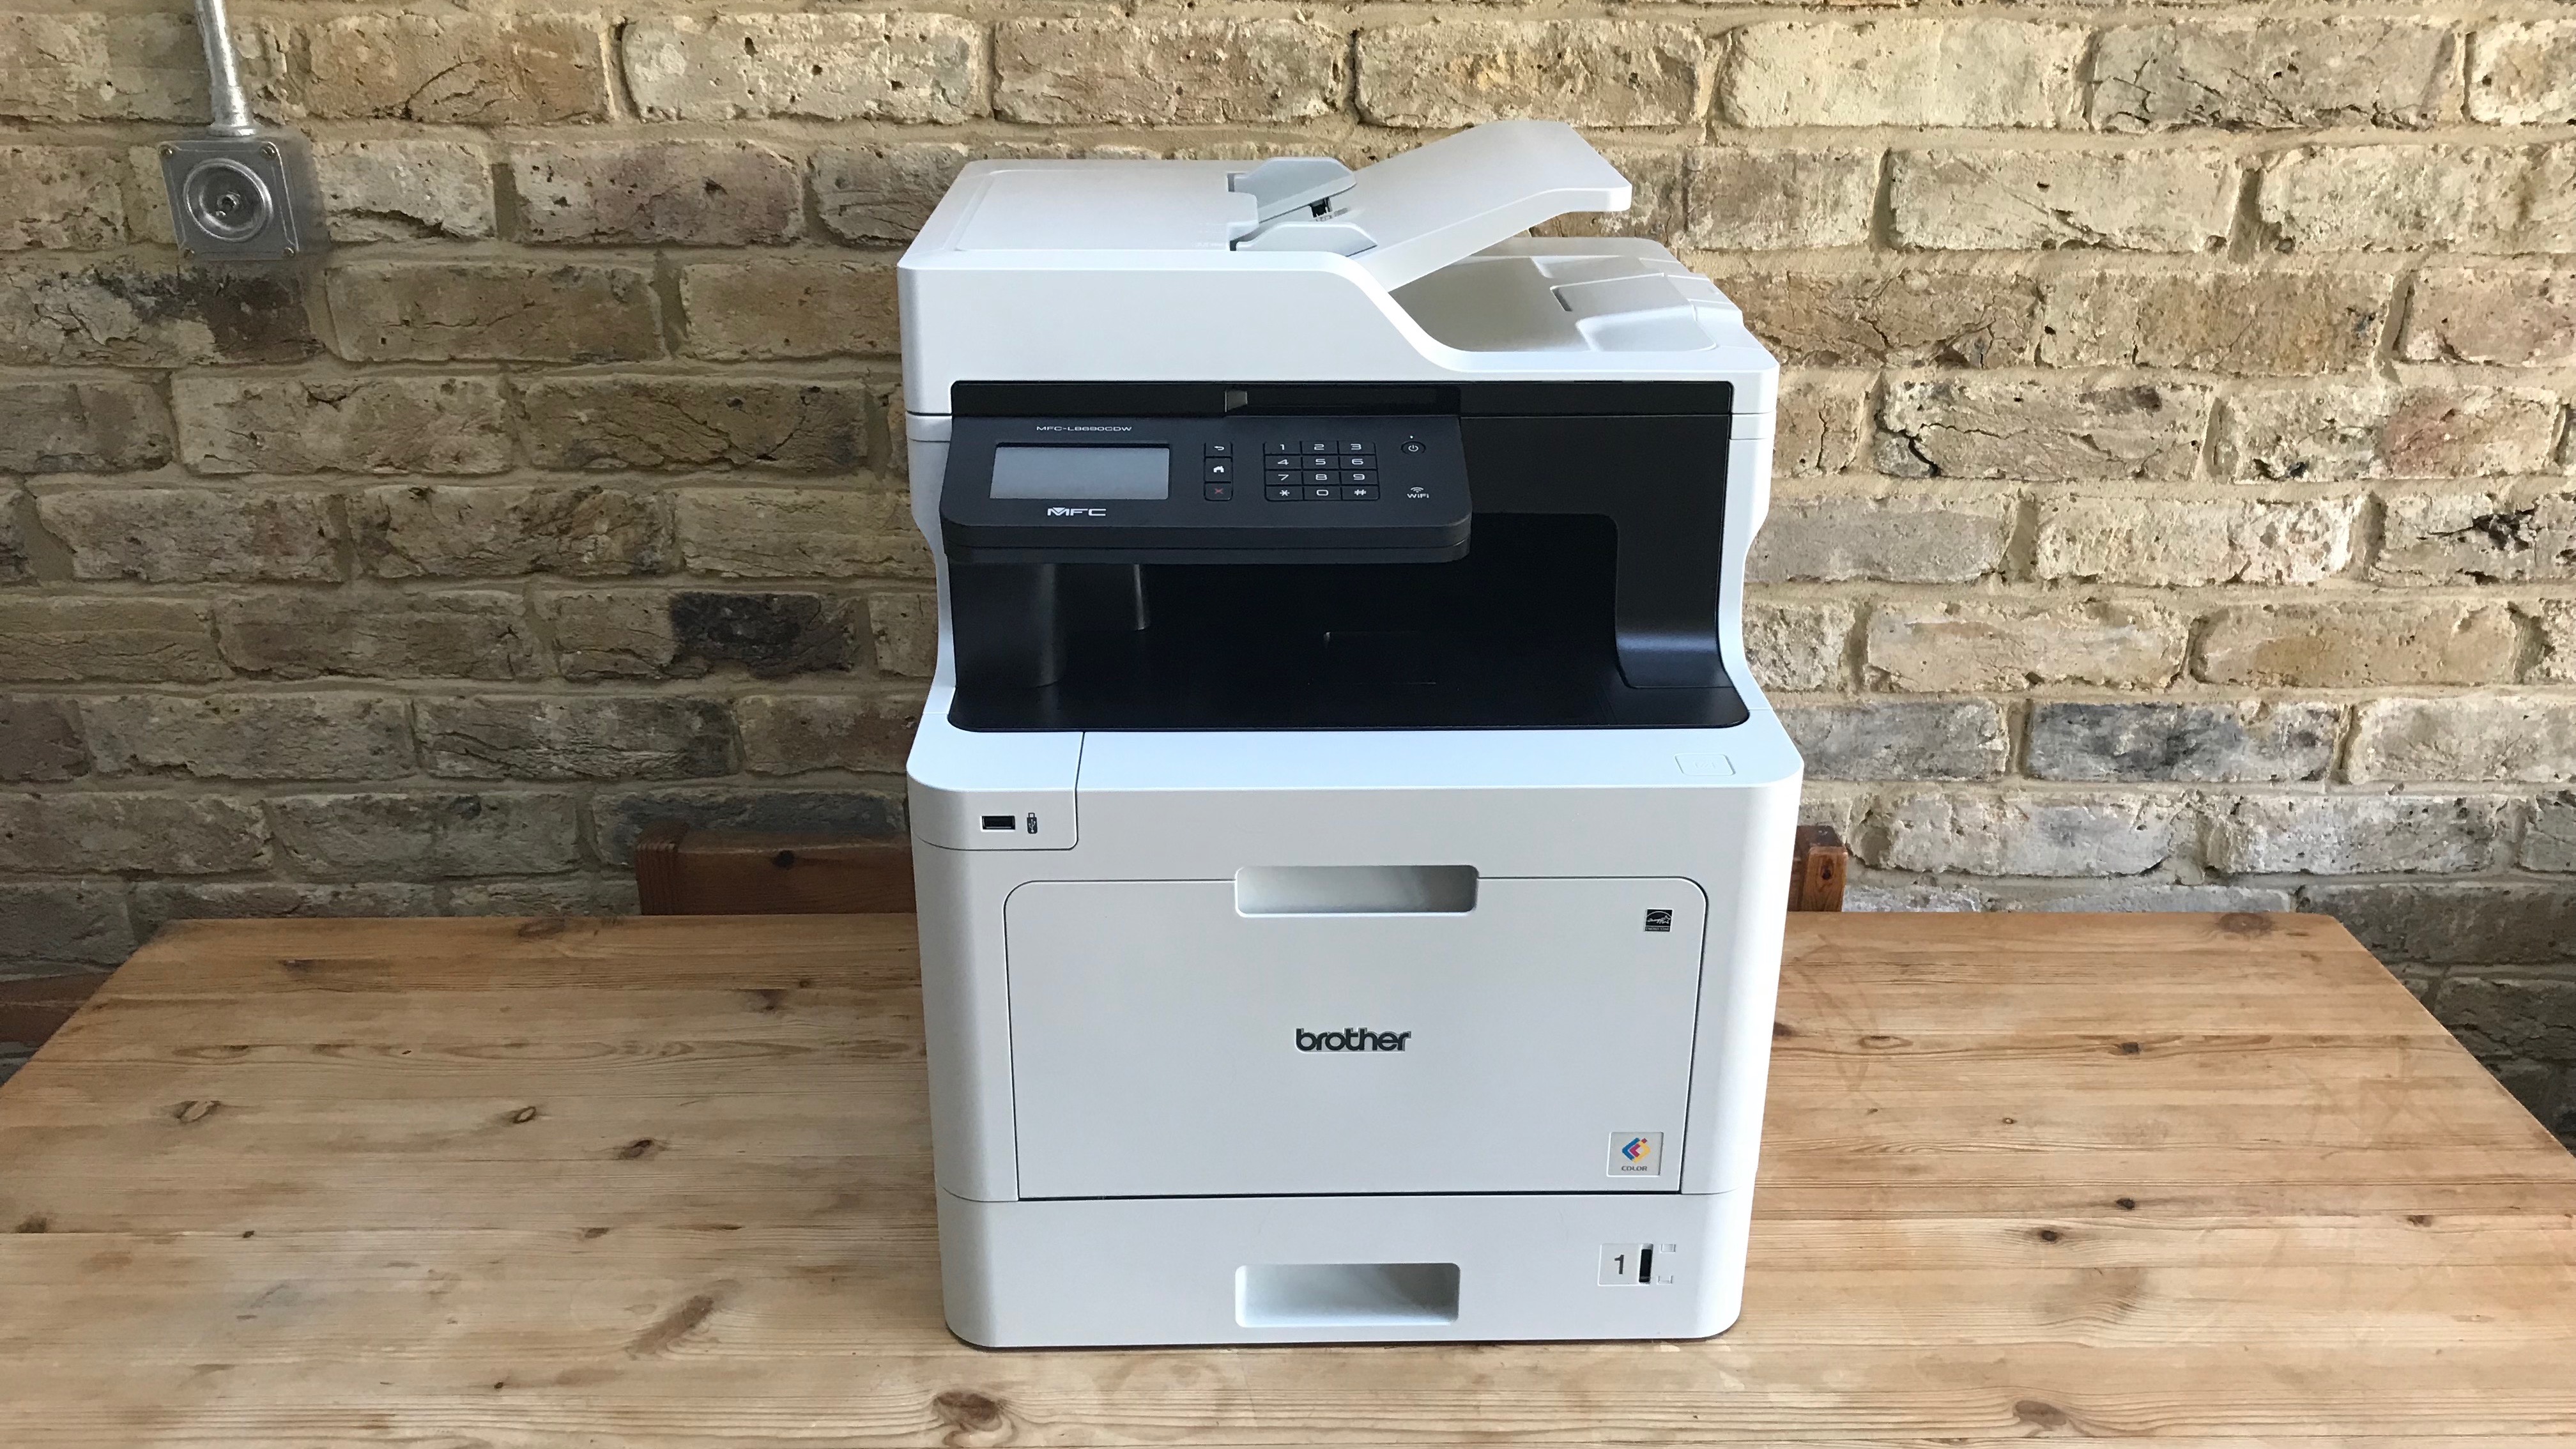 Brother MFC-L8690CDW multifunction printer review | TechRadar